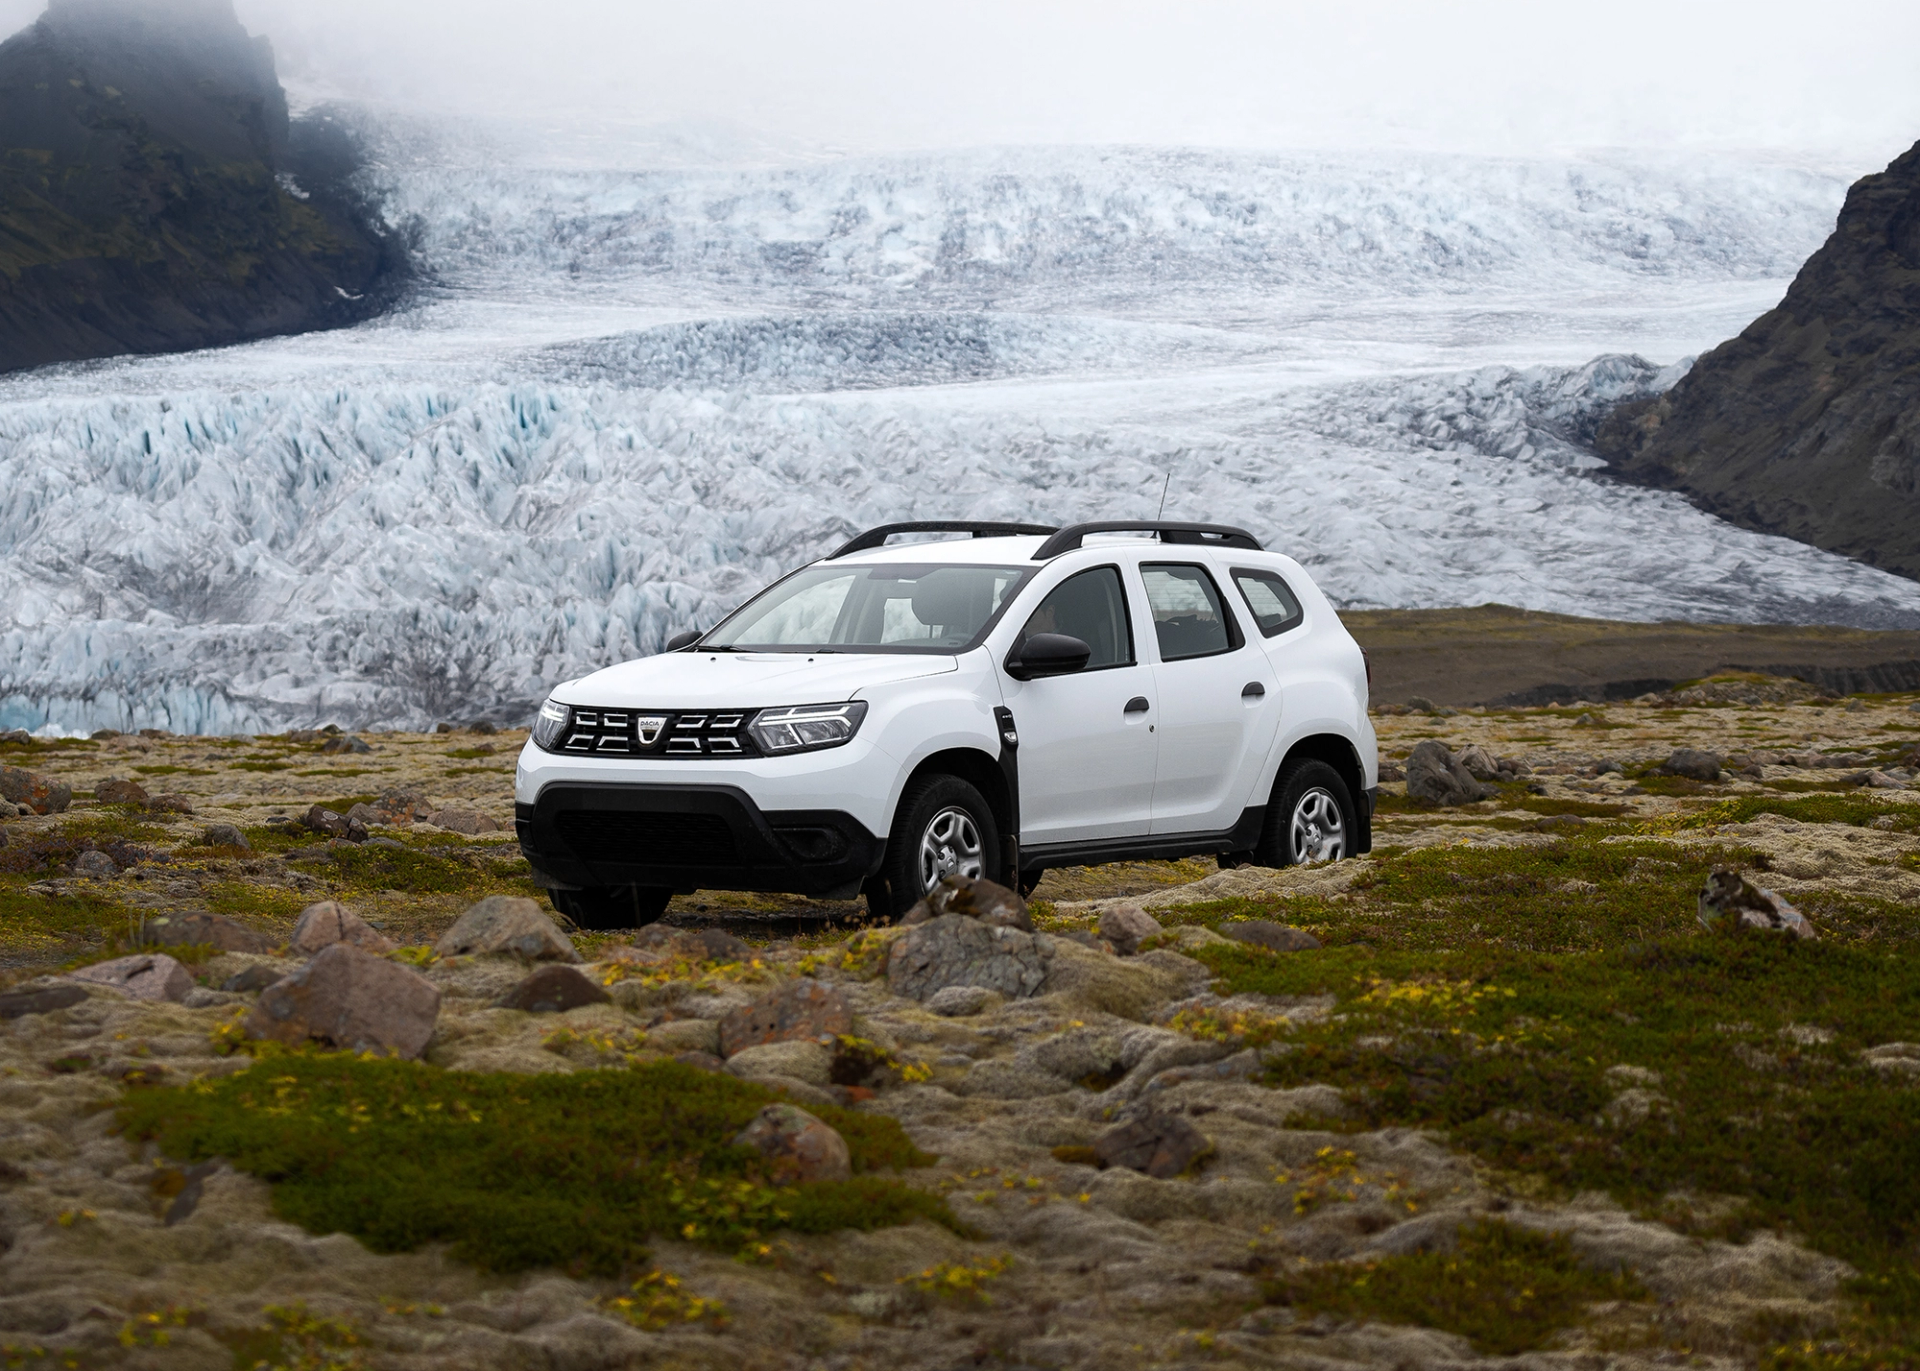 Dacia Duster rental car parked in Iceland near a ice glacier